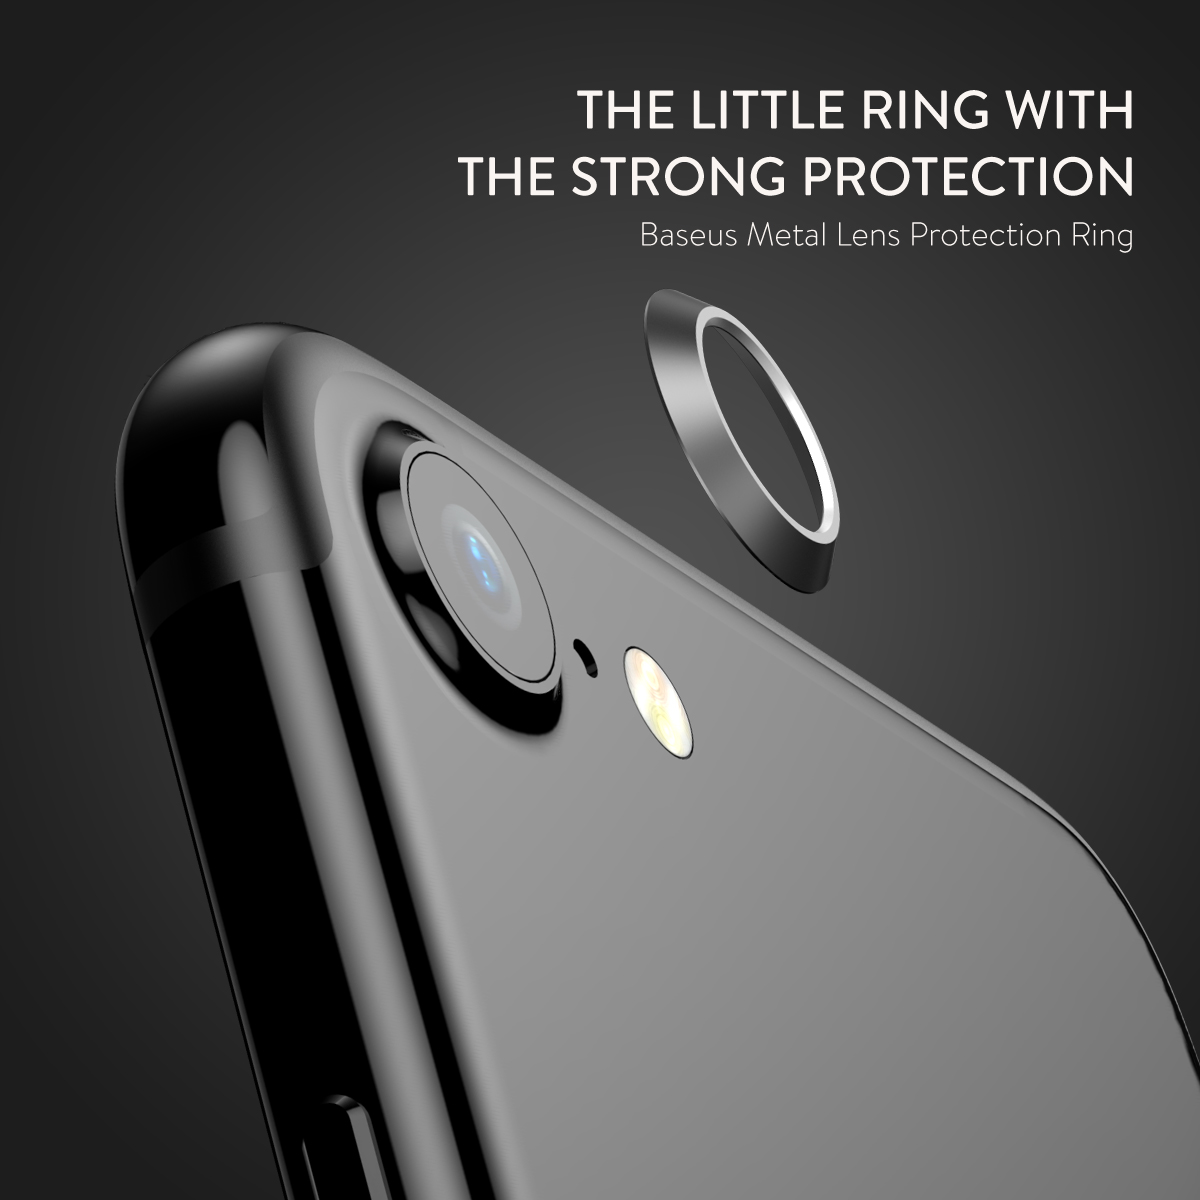 Baseus Metal Lens Protection Ring Anti-scratch Rear Camera Lens Circle Protector for iPhone 7